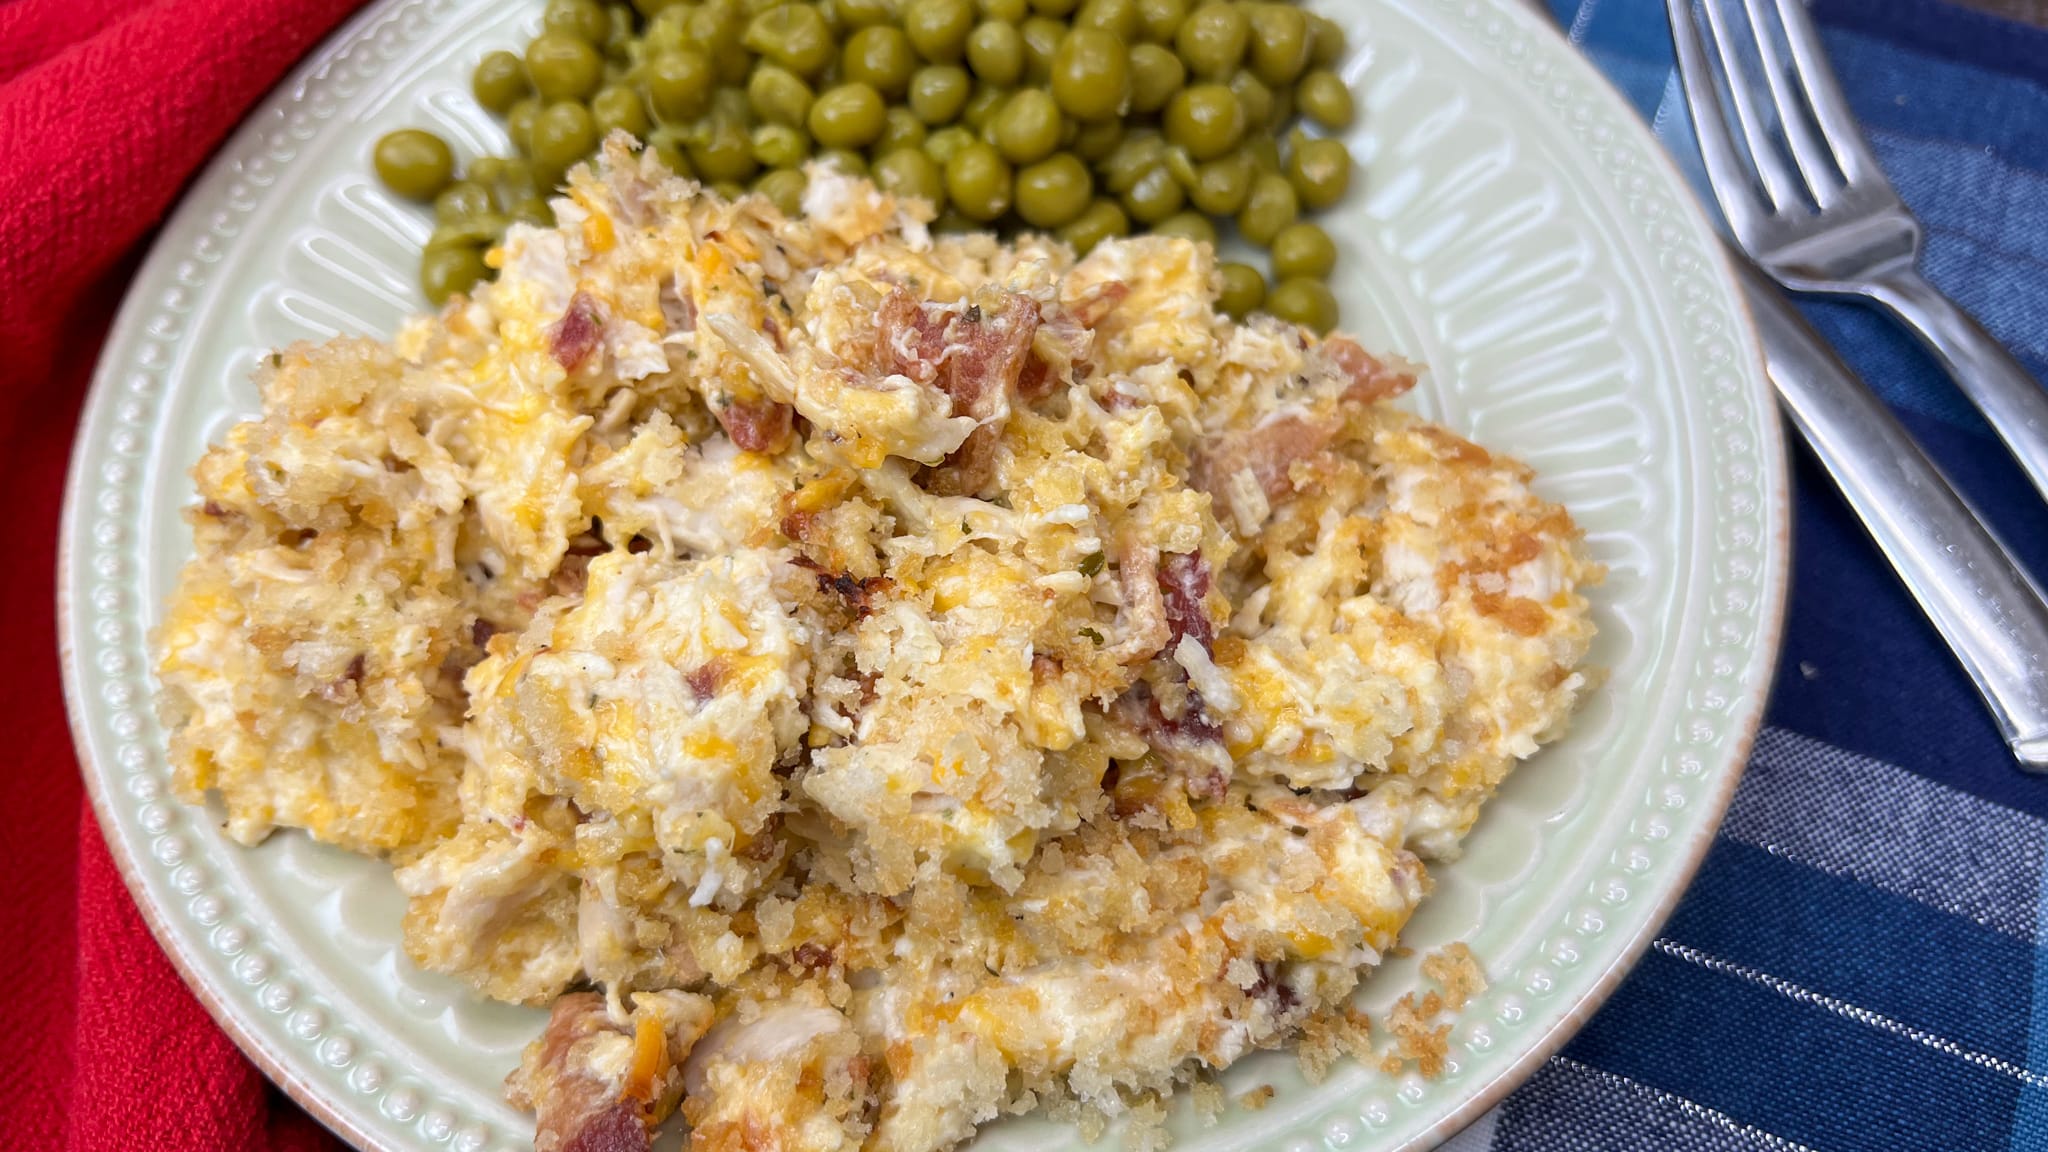 Crockpot Chicken And Rice Casserole Recipe with Bacon! {EASY}